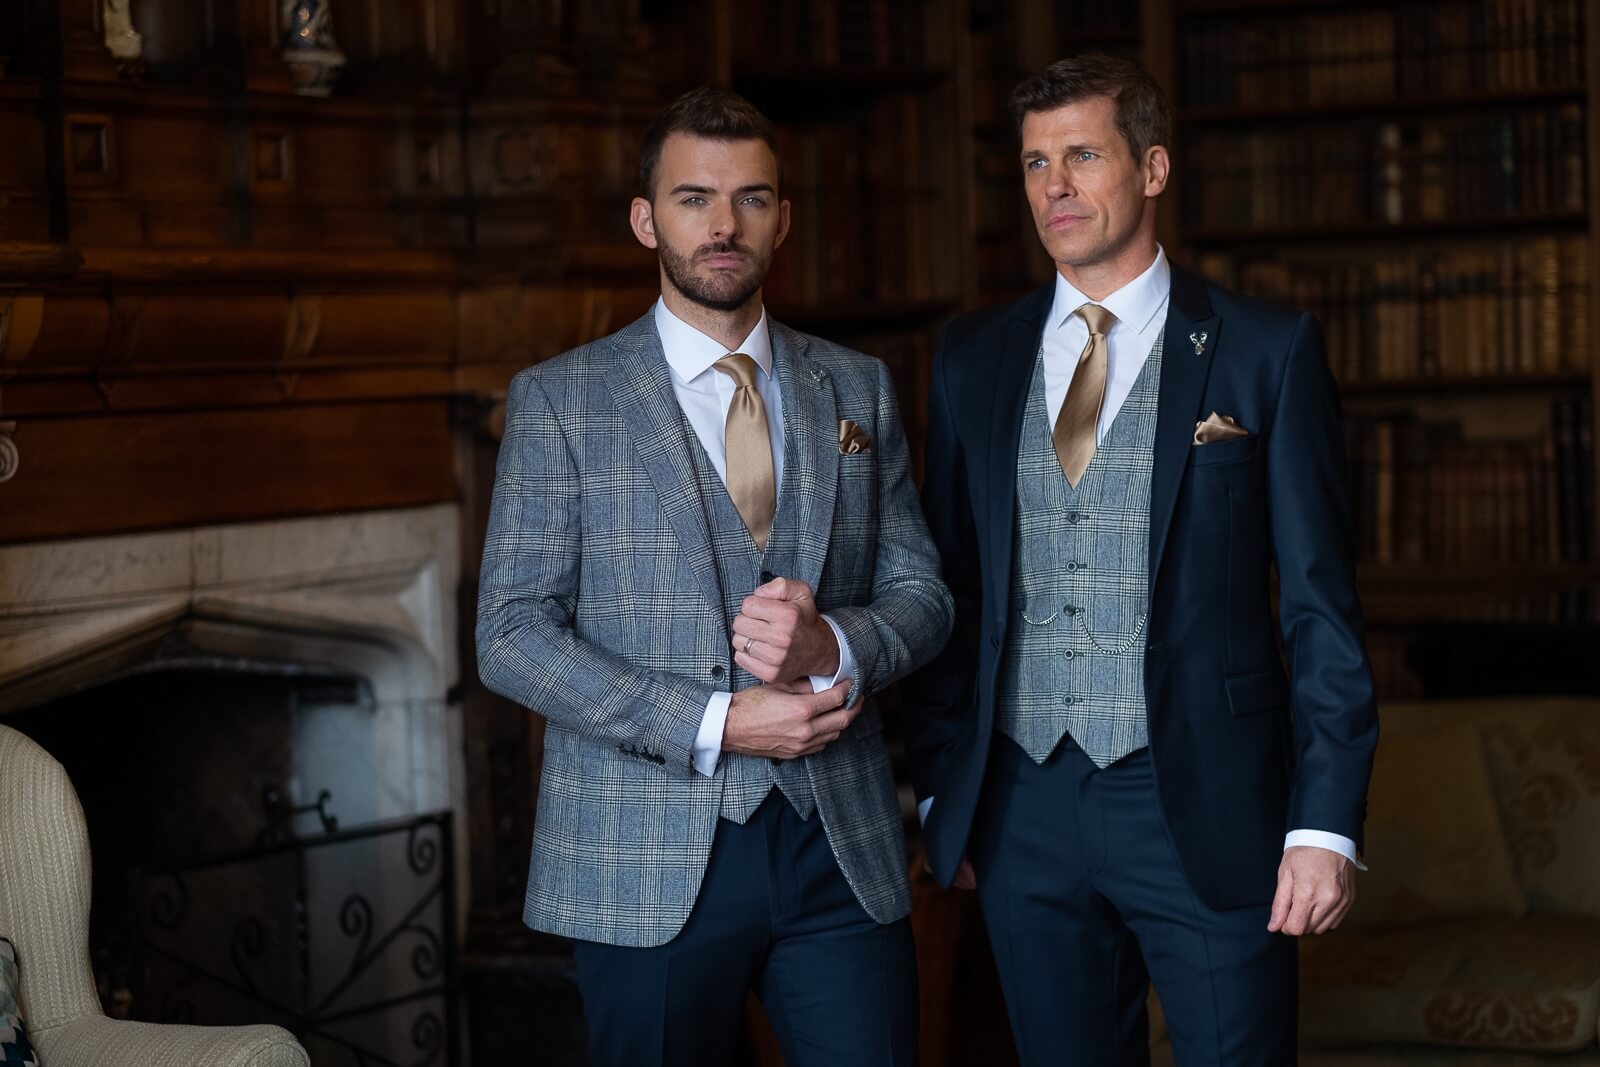 Men's Wedding Suit Trends For 2019 | Blog | Whitfield & Ward